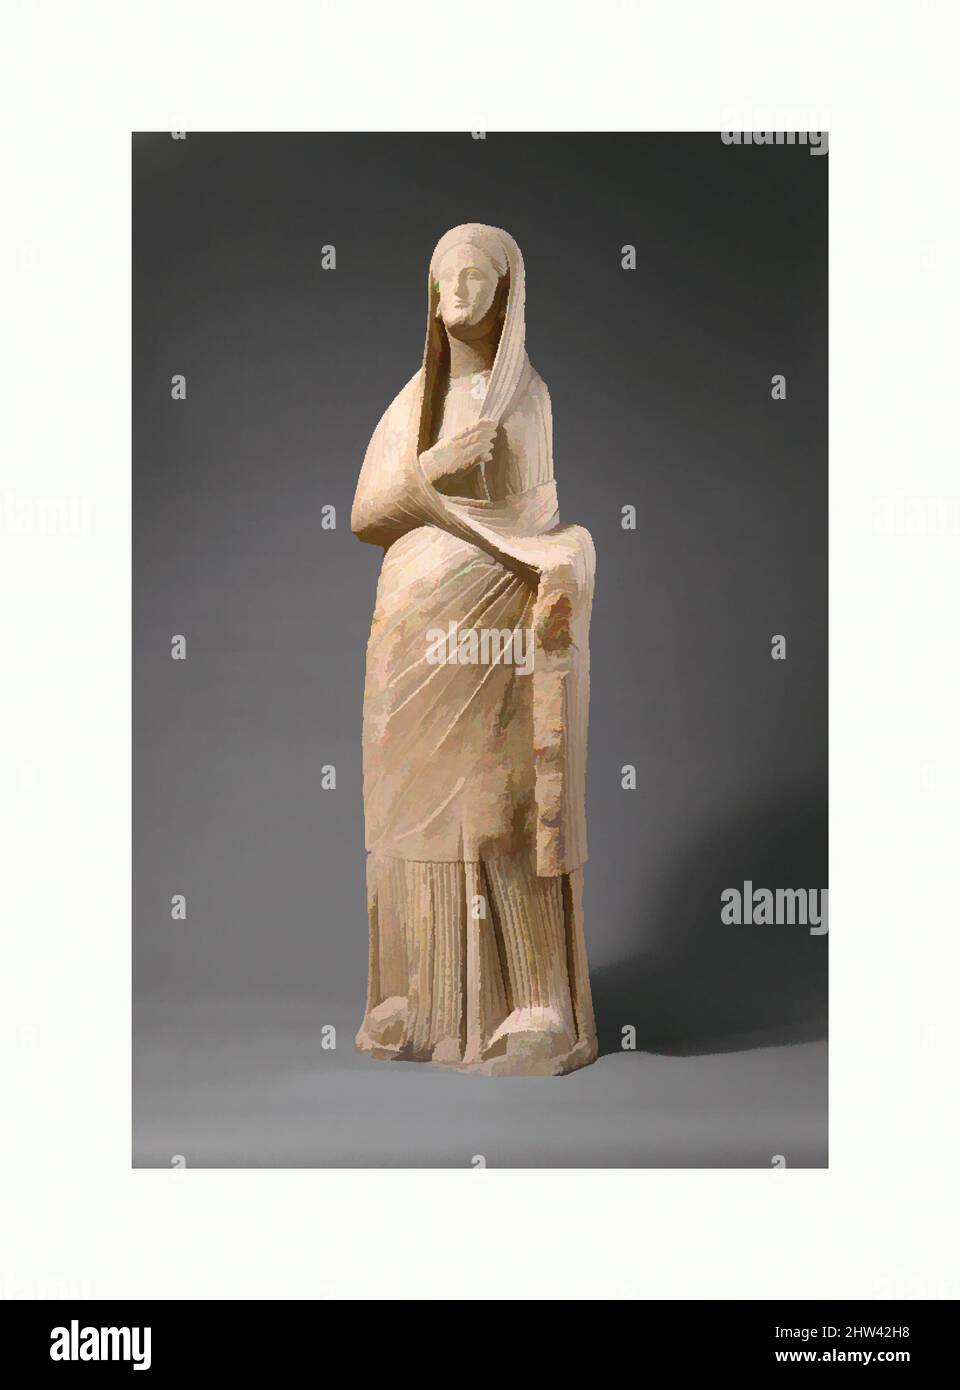 Art inspired by Limestone statue of a veiled female votary, Late Hellenistic or Republican, 1st century B.C., Cypriot, Limestone, Overall: 76 x 24 x 13 in. (193 x 61 x 33 cm), Stone Sculpture, Female votary wearing tunic and cloak, the latter drawn over her head, Classic works modernized by Artotop with a splash of modernity. Shapes, color and value, eye-catching visual impact on art. Emotions through freedom of artworks in a contemporary way. A timeless message pursuing a wildly creative new direction. Artists turning to the digital medium and creating the Artotop NFT Stock Photo